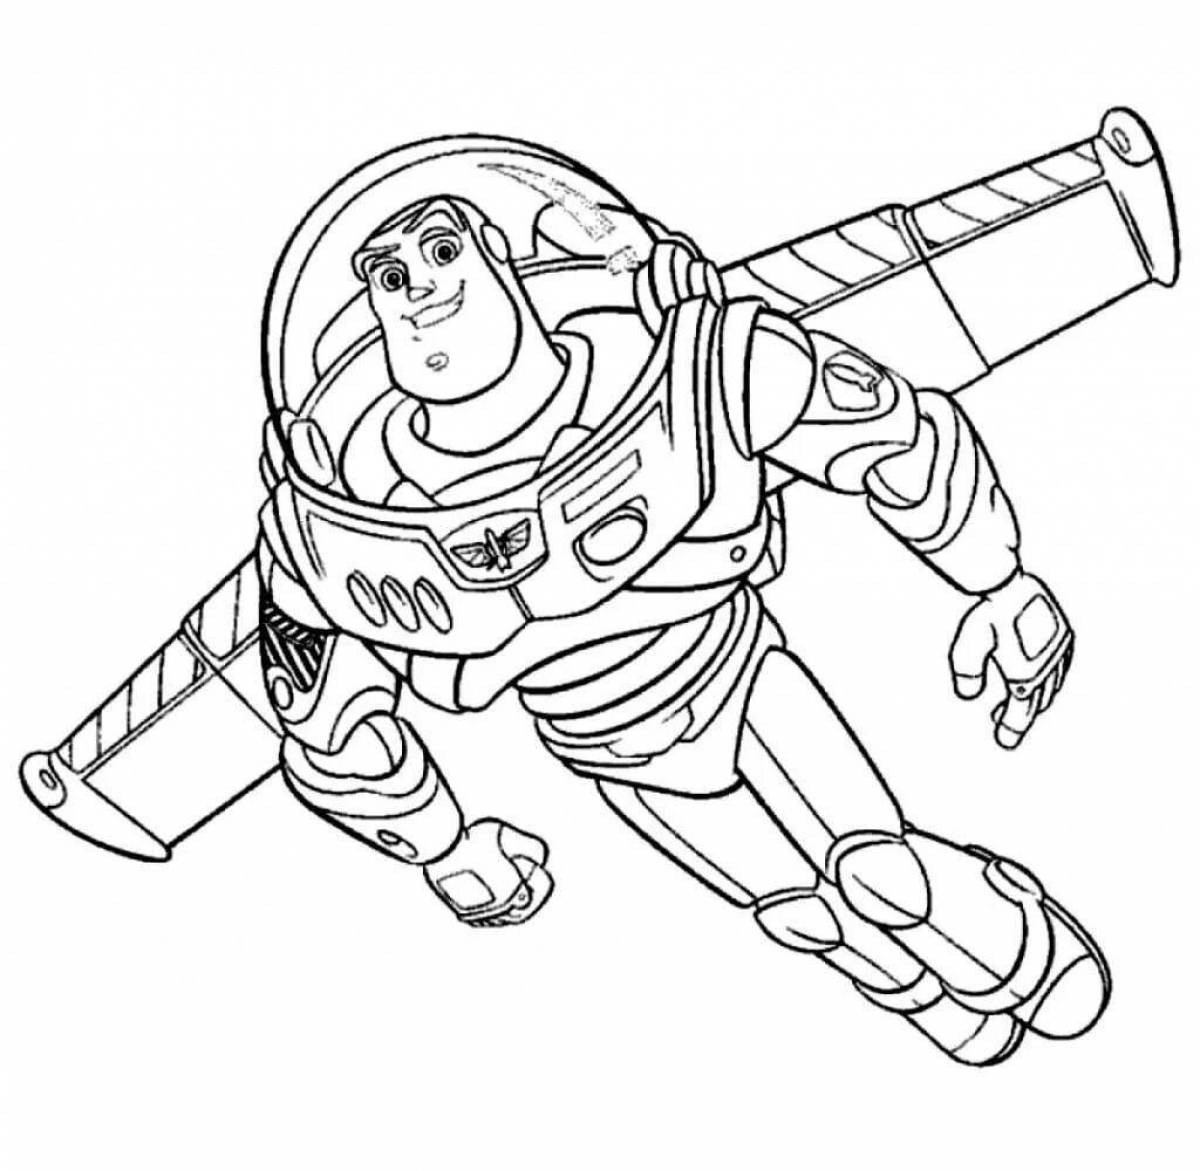 Buzz lightyear awesome coloring book